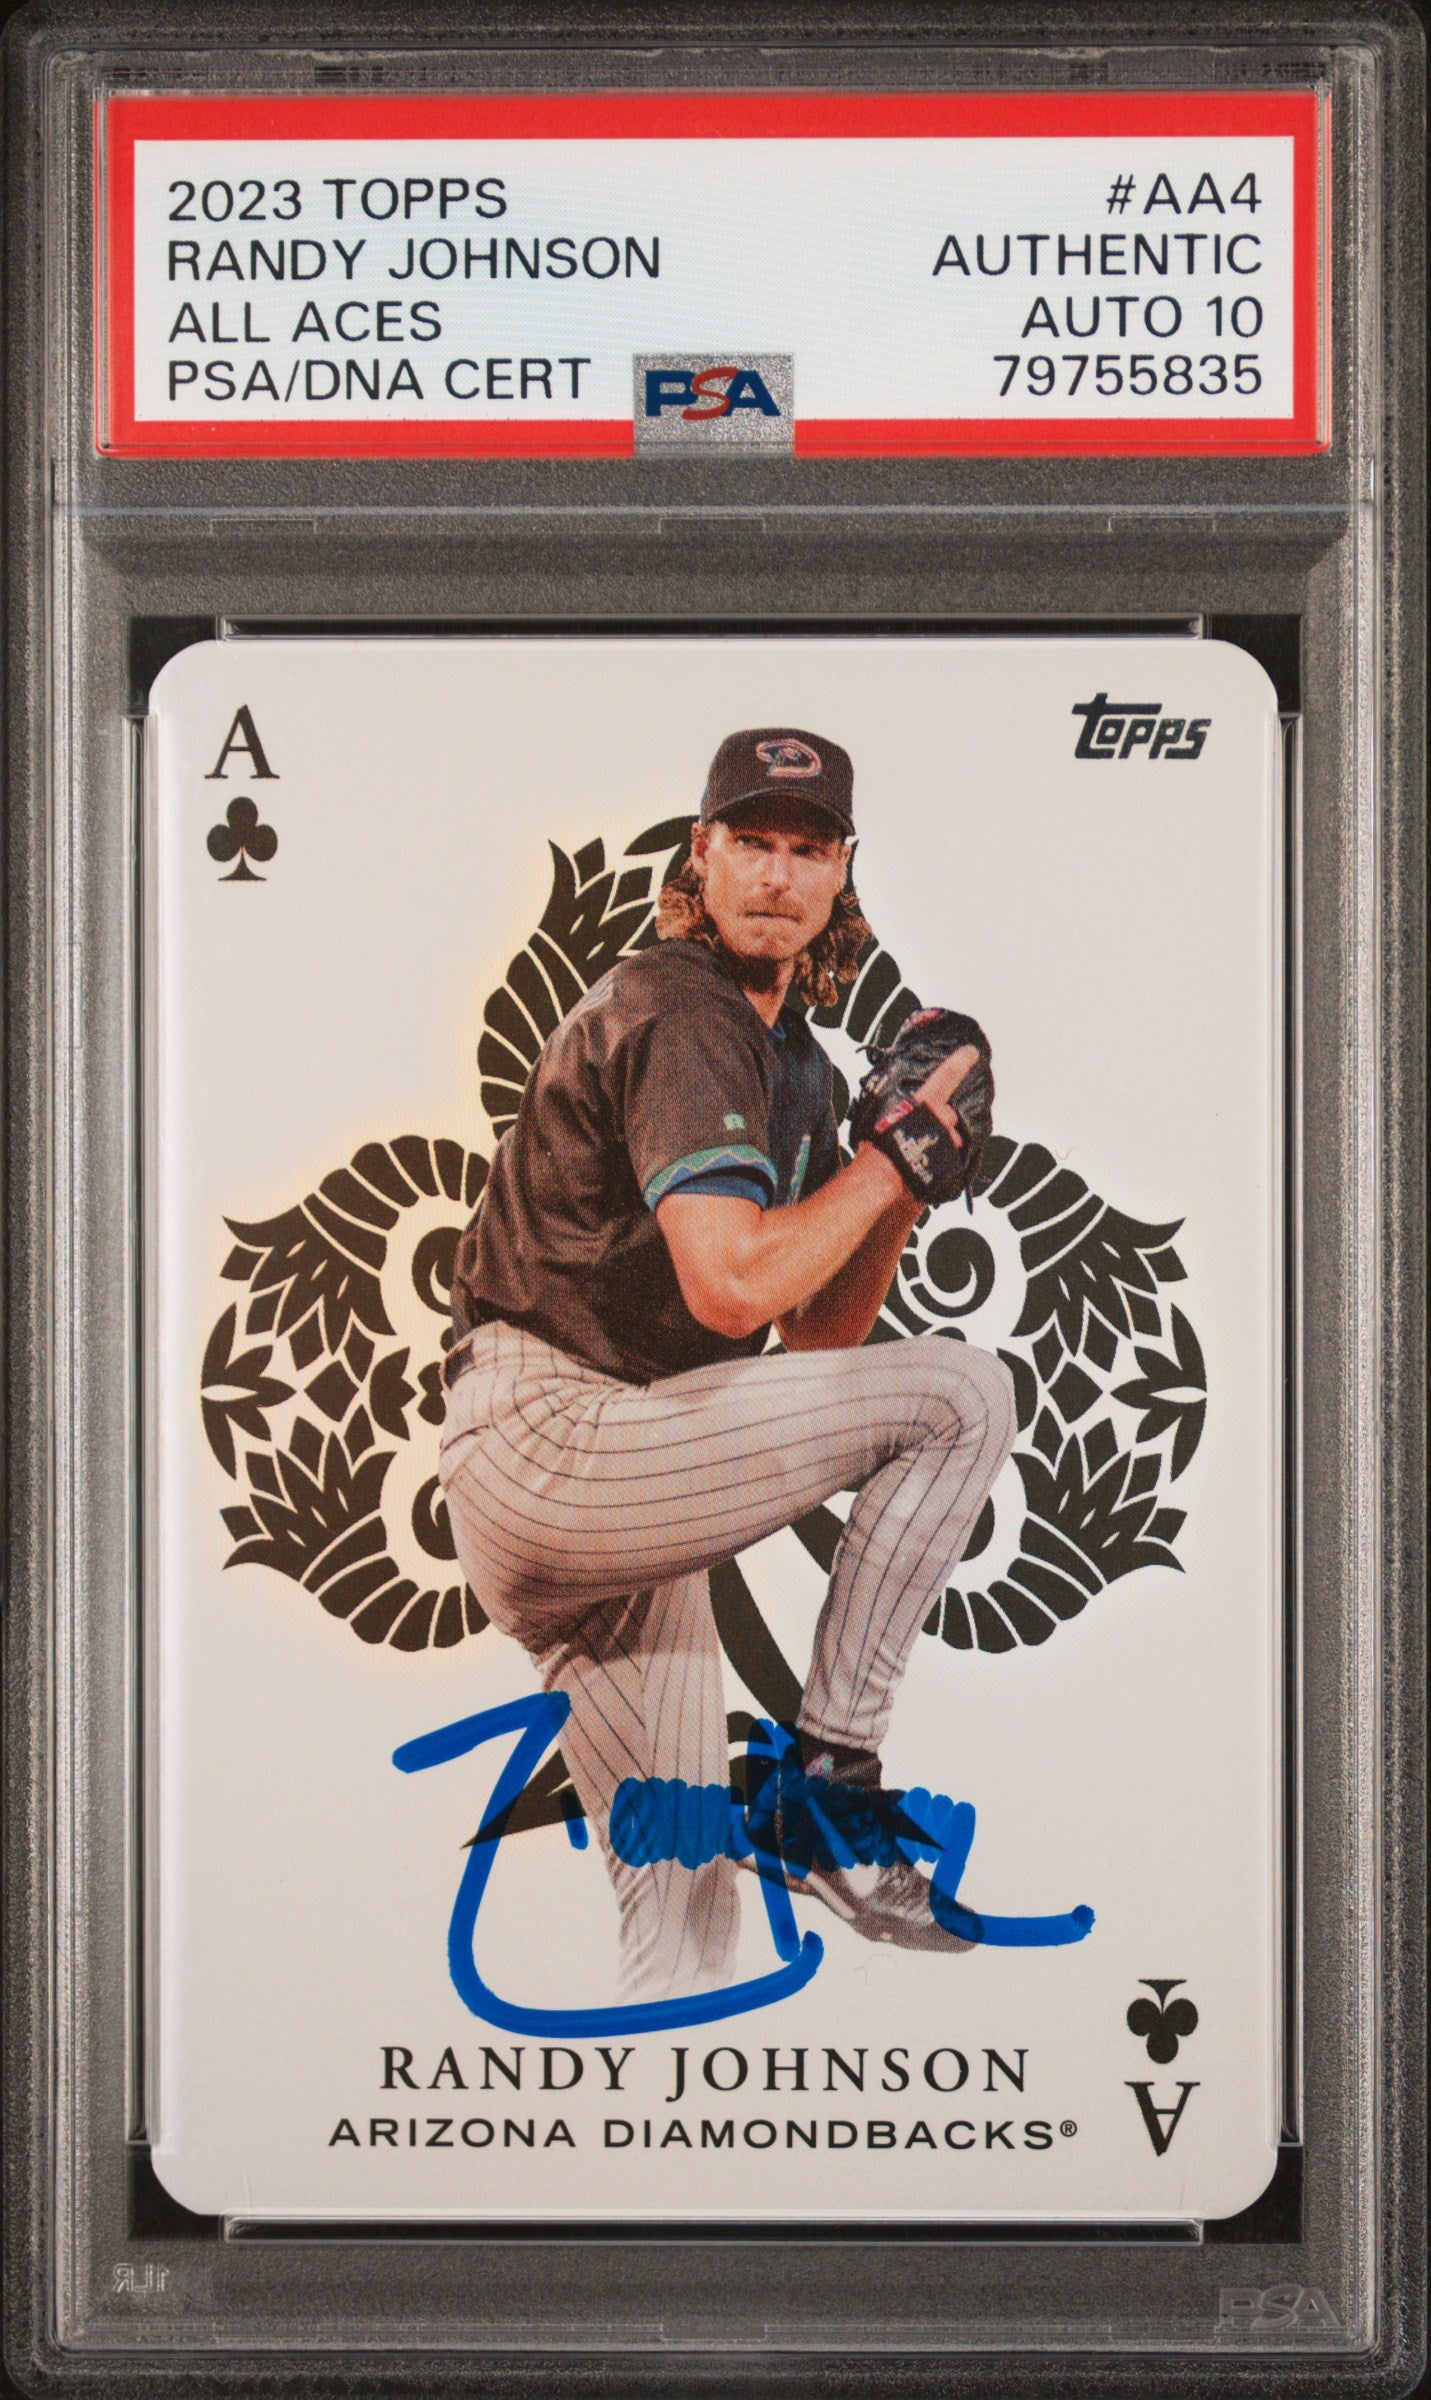 Randy Johnson 2023 Topps All Aces Signed Card #AA4 Auto 